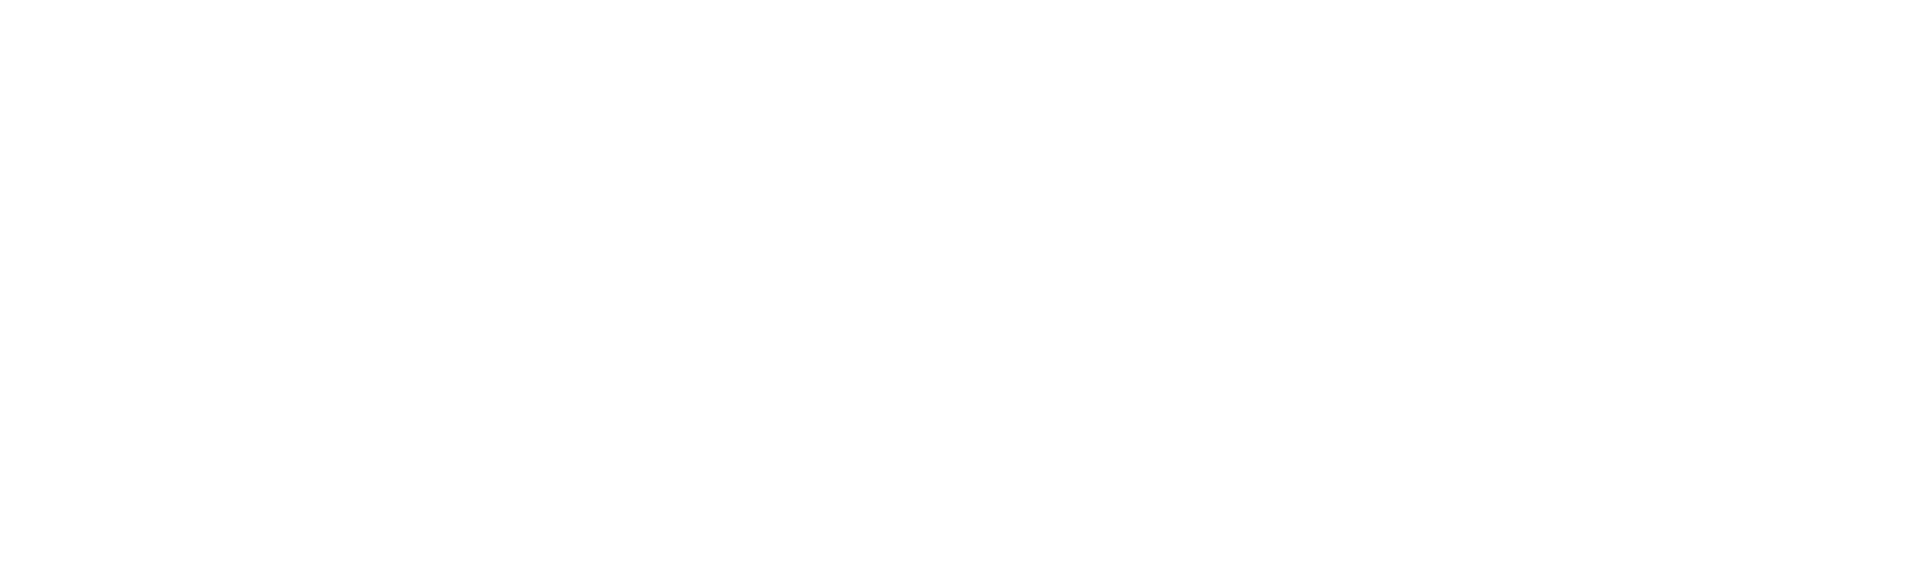 Meteore Made in Italy